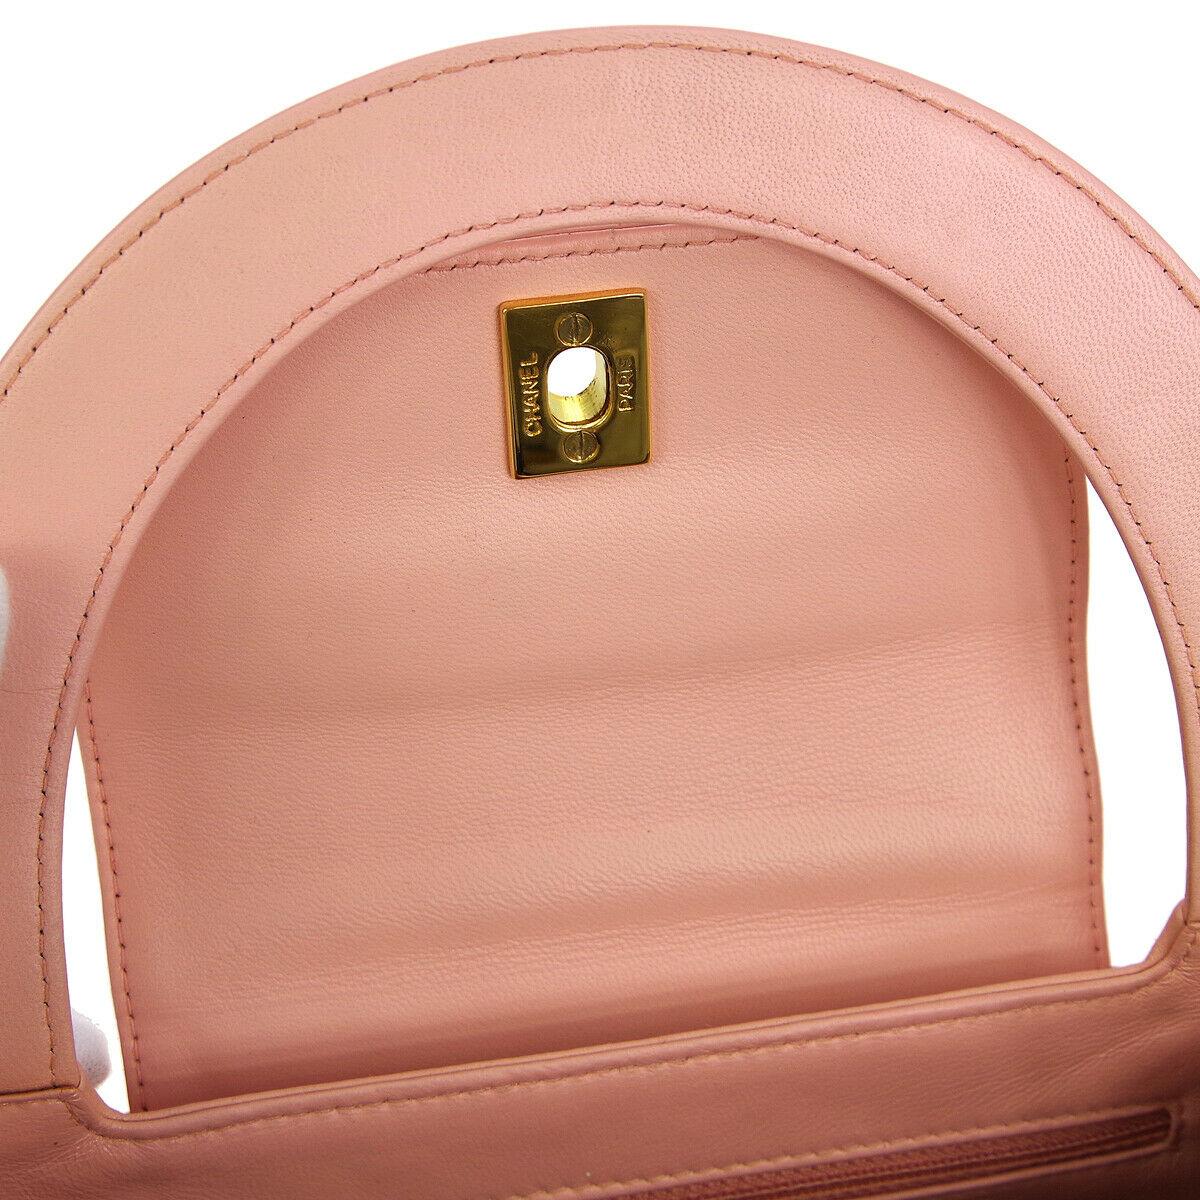 Chanel Baby Pink Leather Top Handle Satchel Kelly Style Small Party Evening Bag

Leather
Gold tone hardware
Leather lining
Turnlock closure
Handle drop 3.5